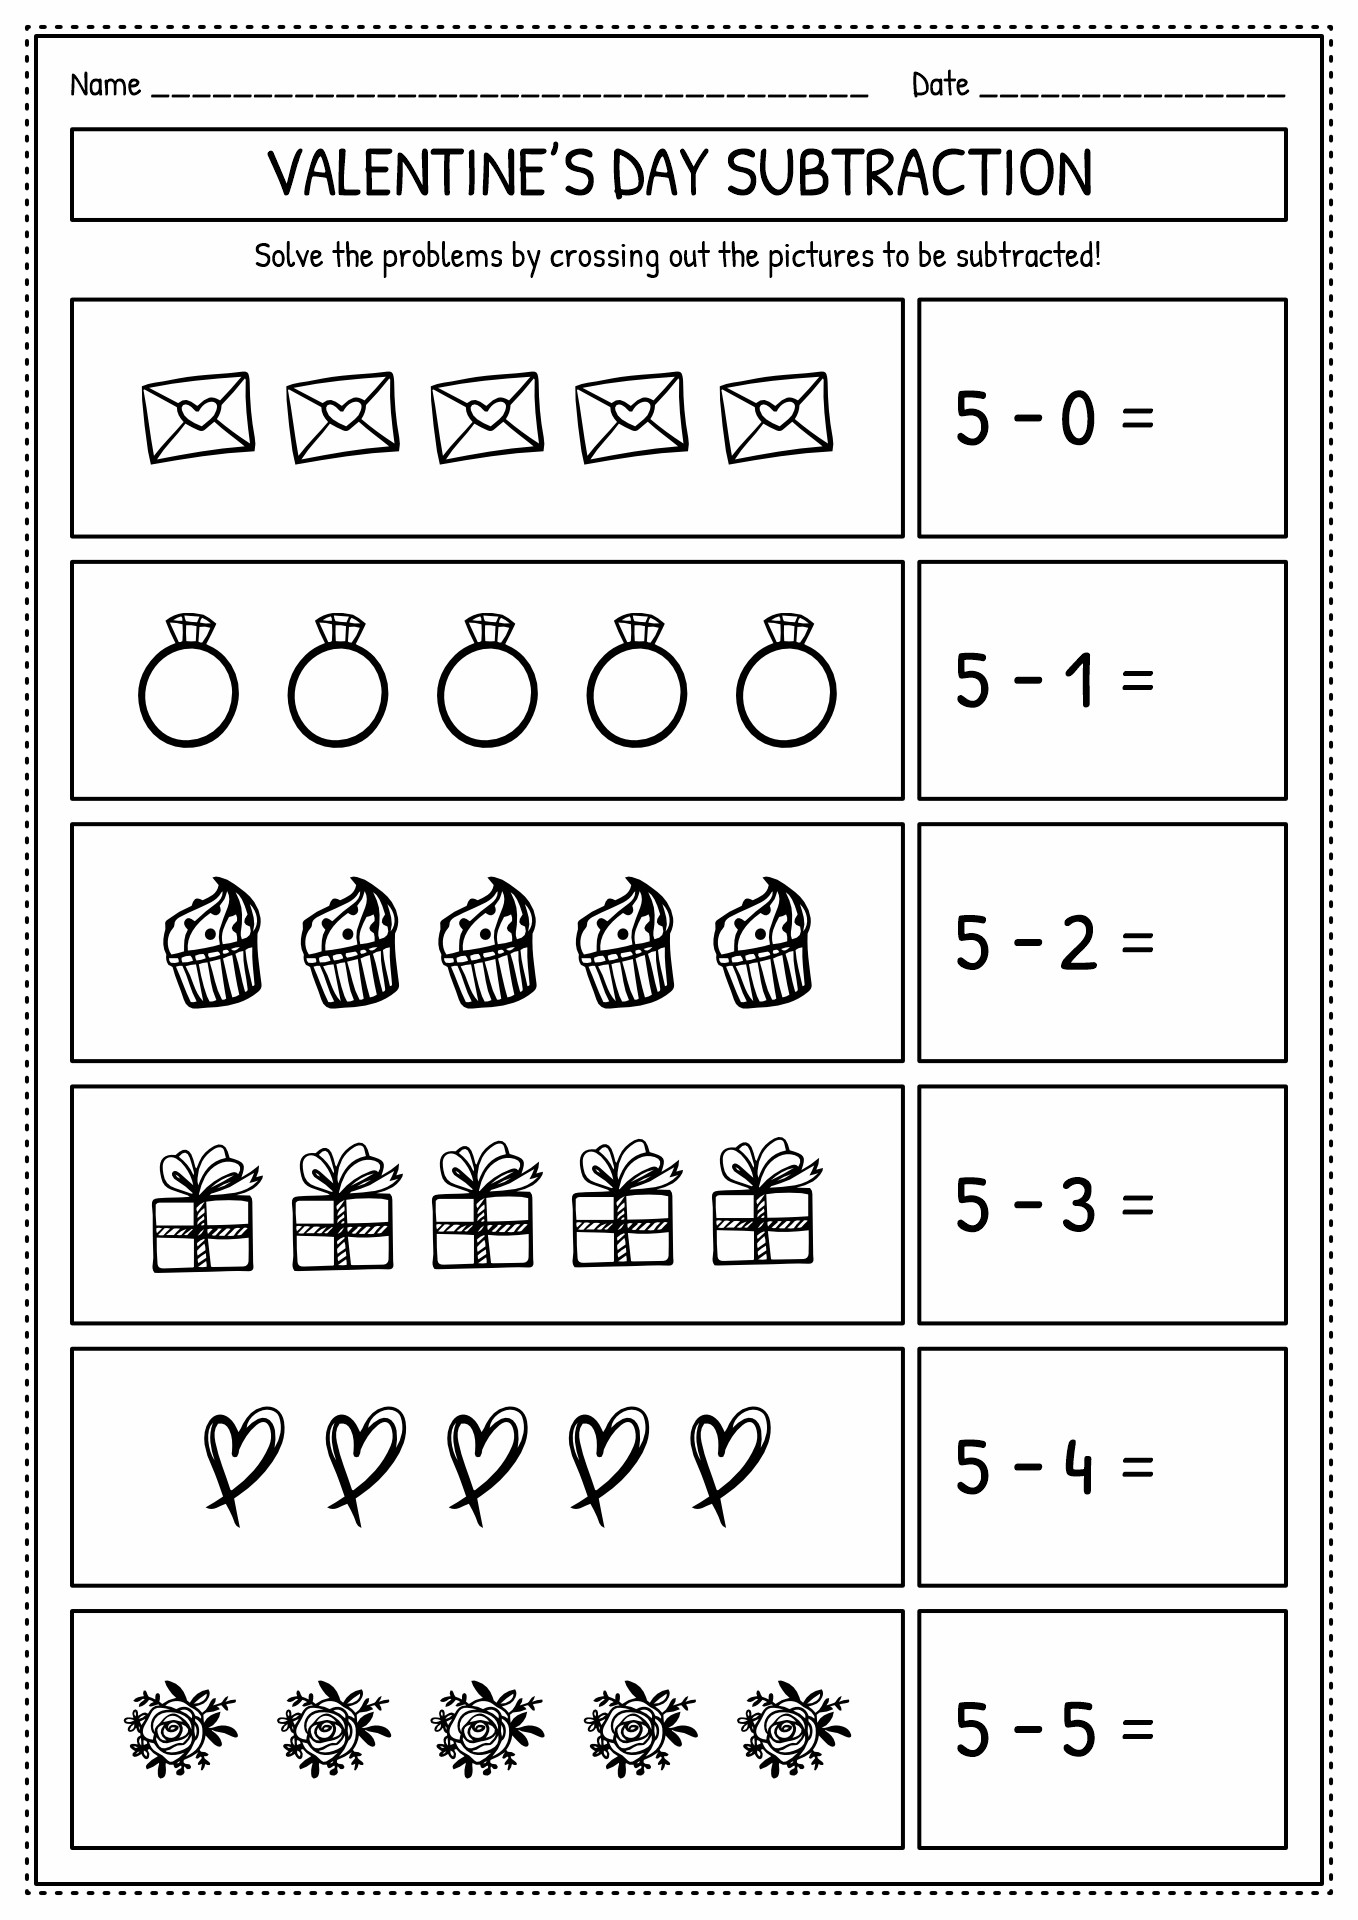 Free Valentines Day Worksheets for First Grade